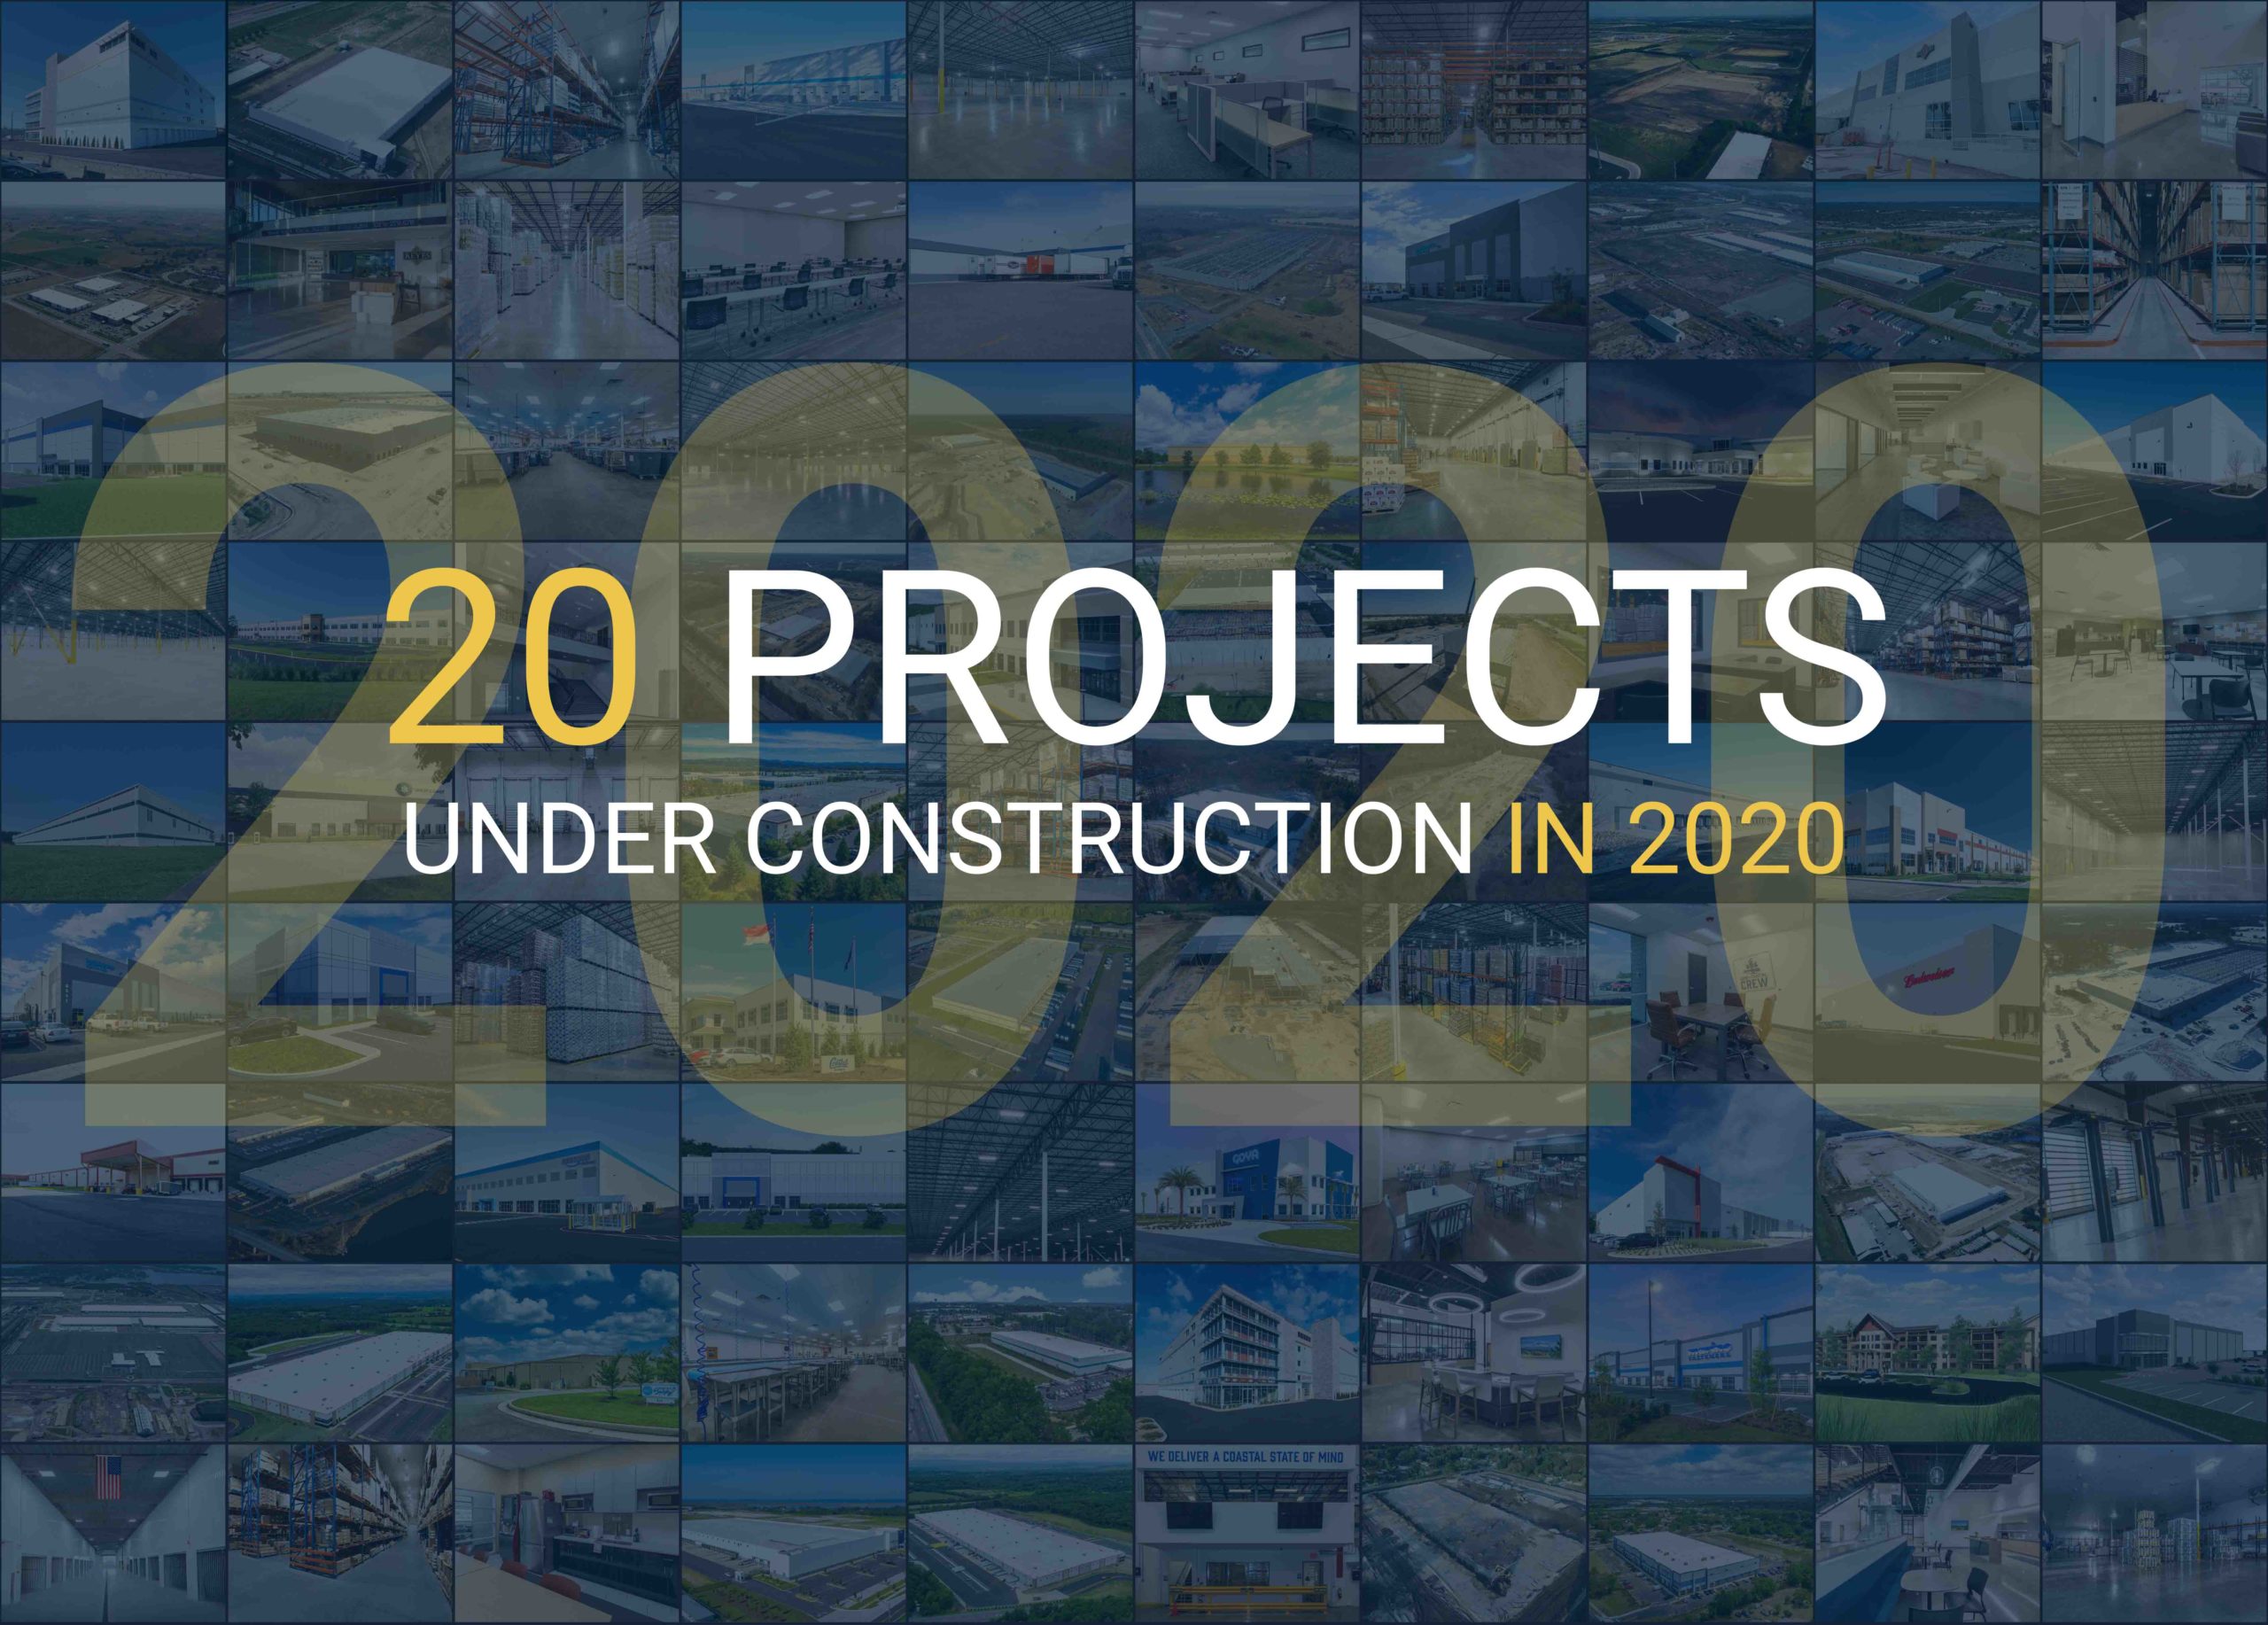 20 Projects Under Construction in 2020